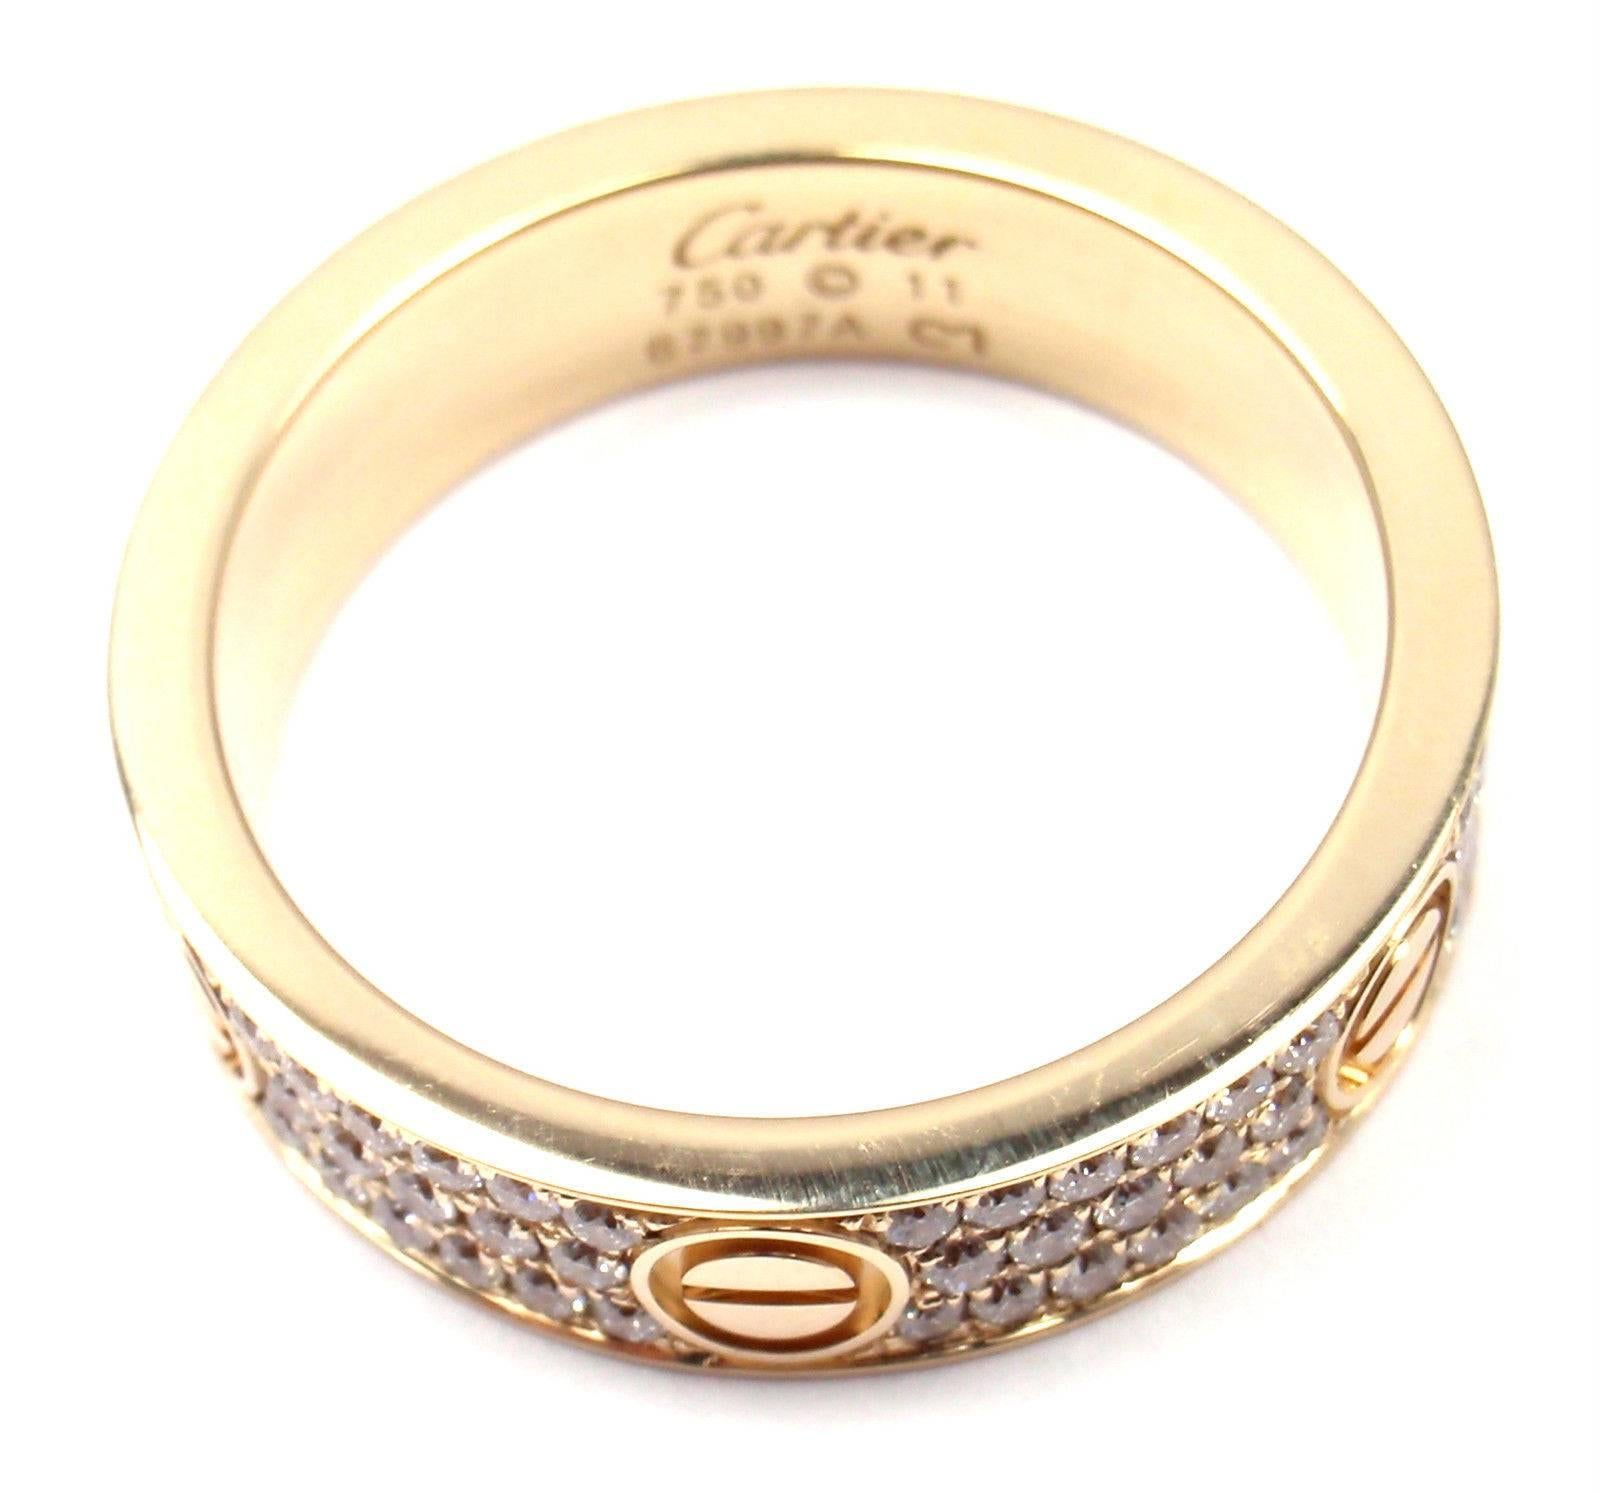 Cartier Love Diamond Paved Yellow Gold Band Ring 1